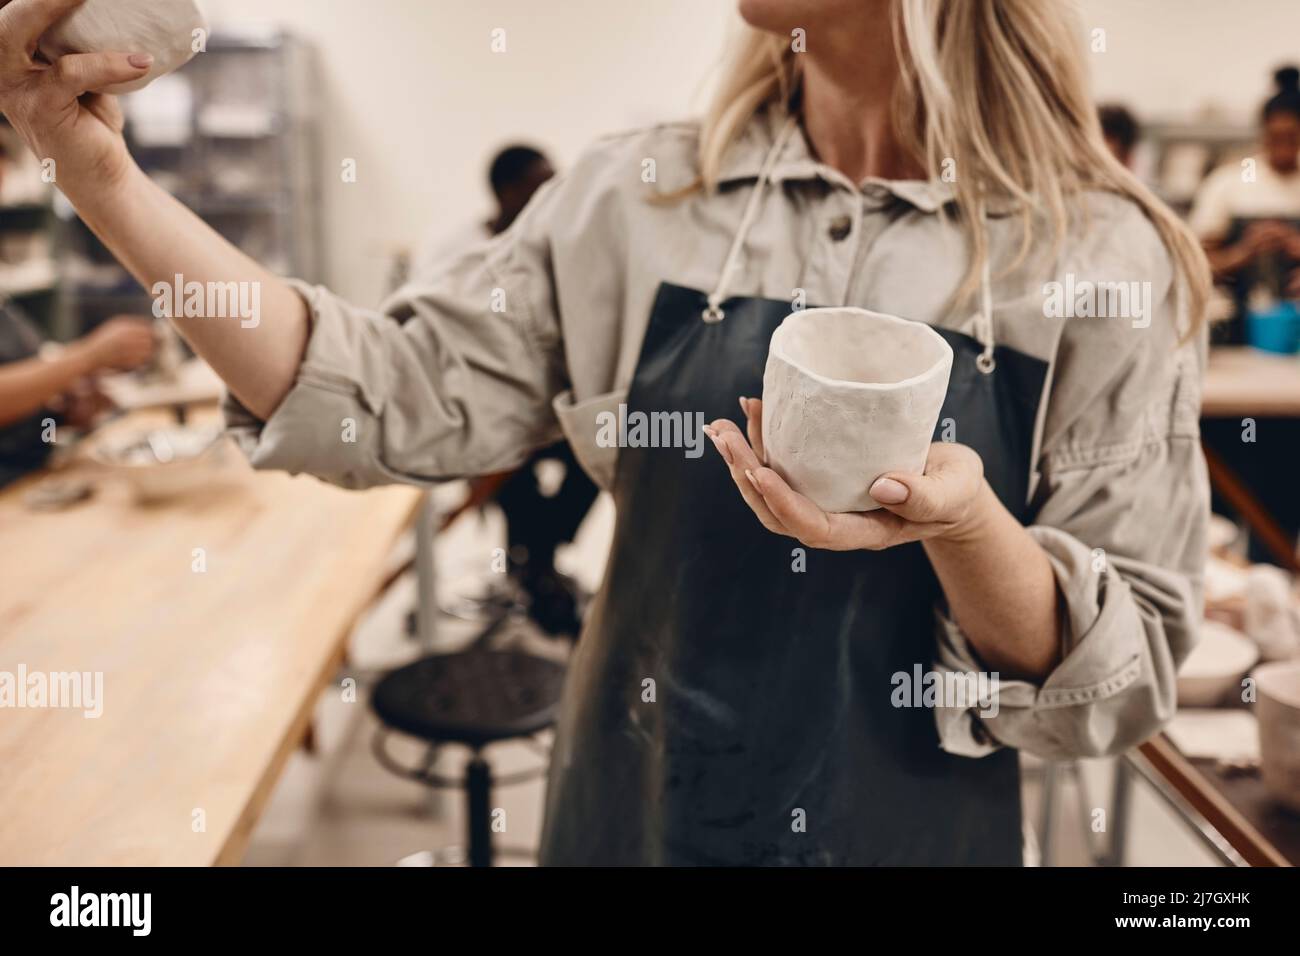 Midsection of mature woman examining ceramics in art class Stock Photo